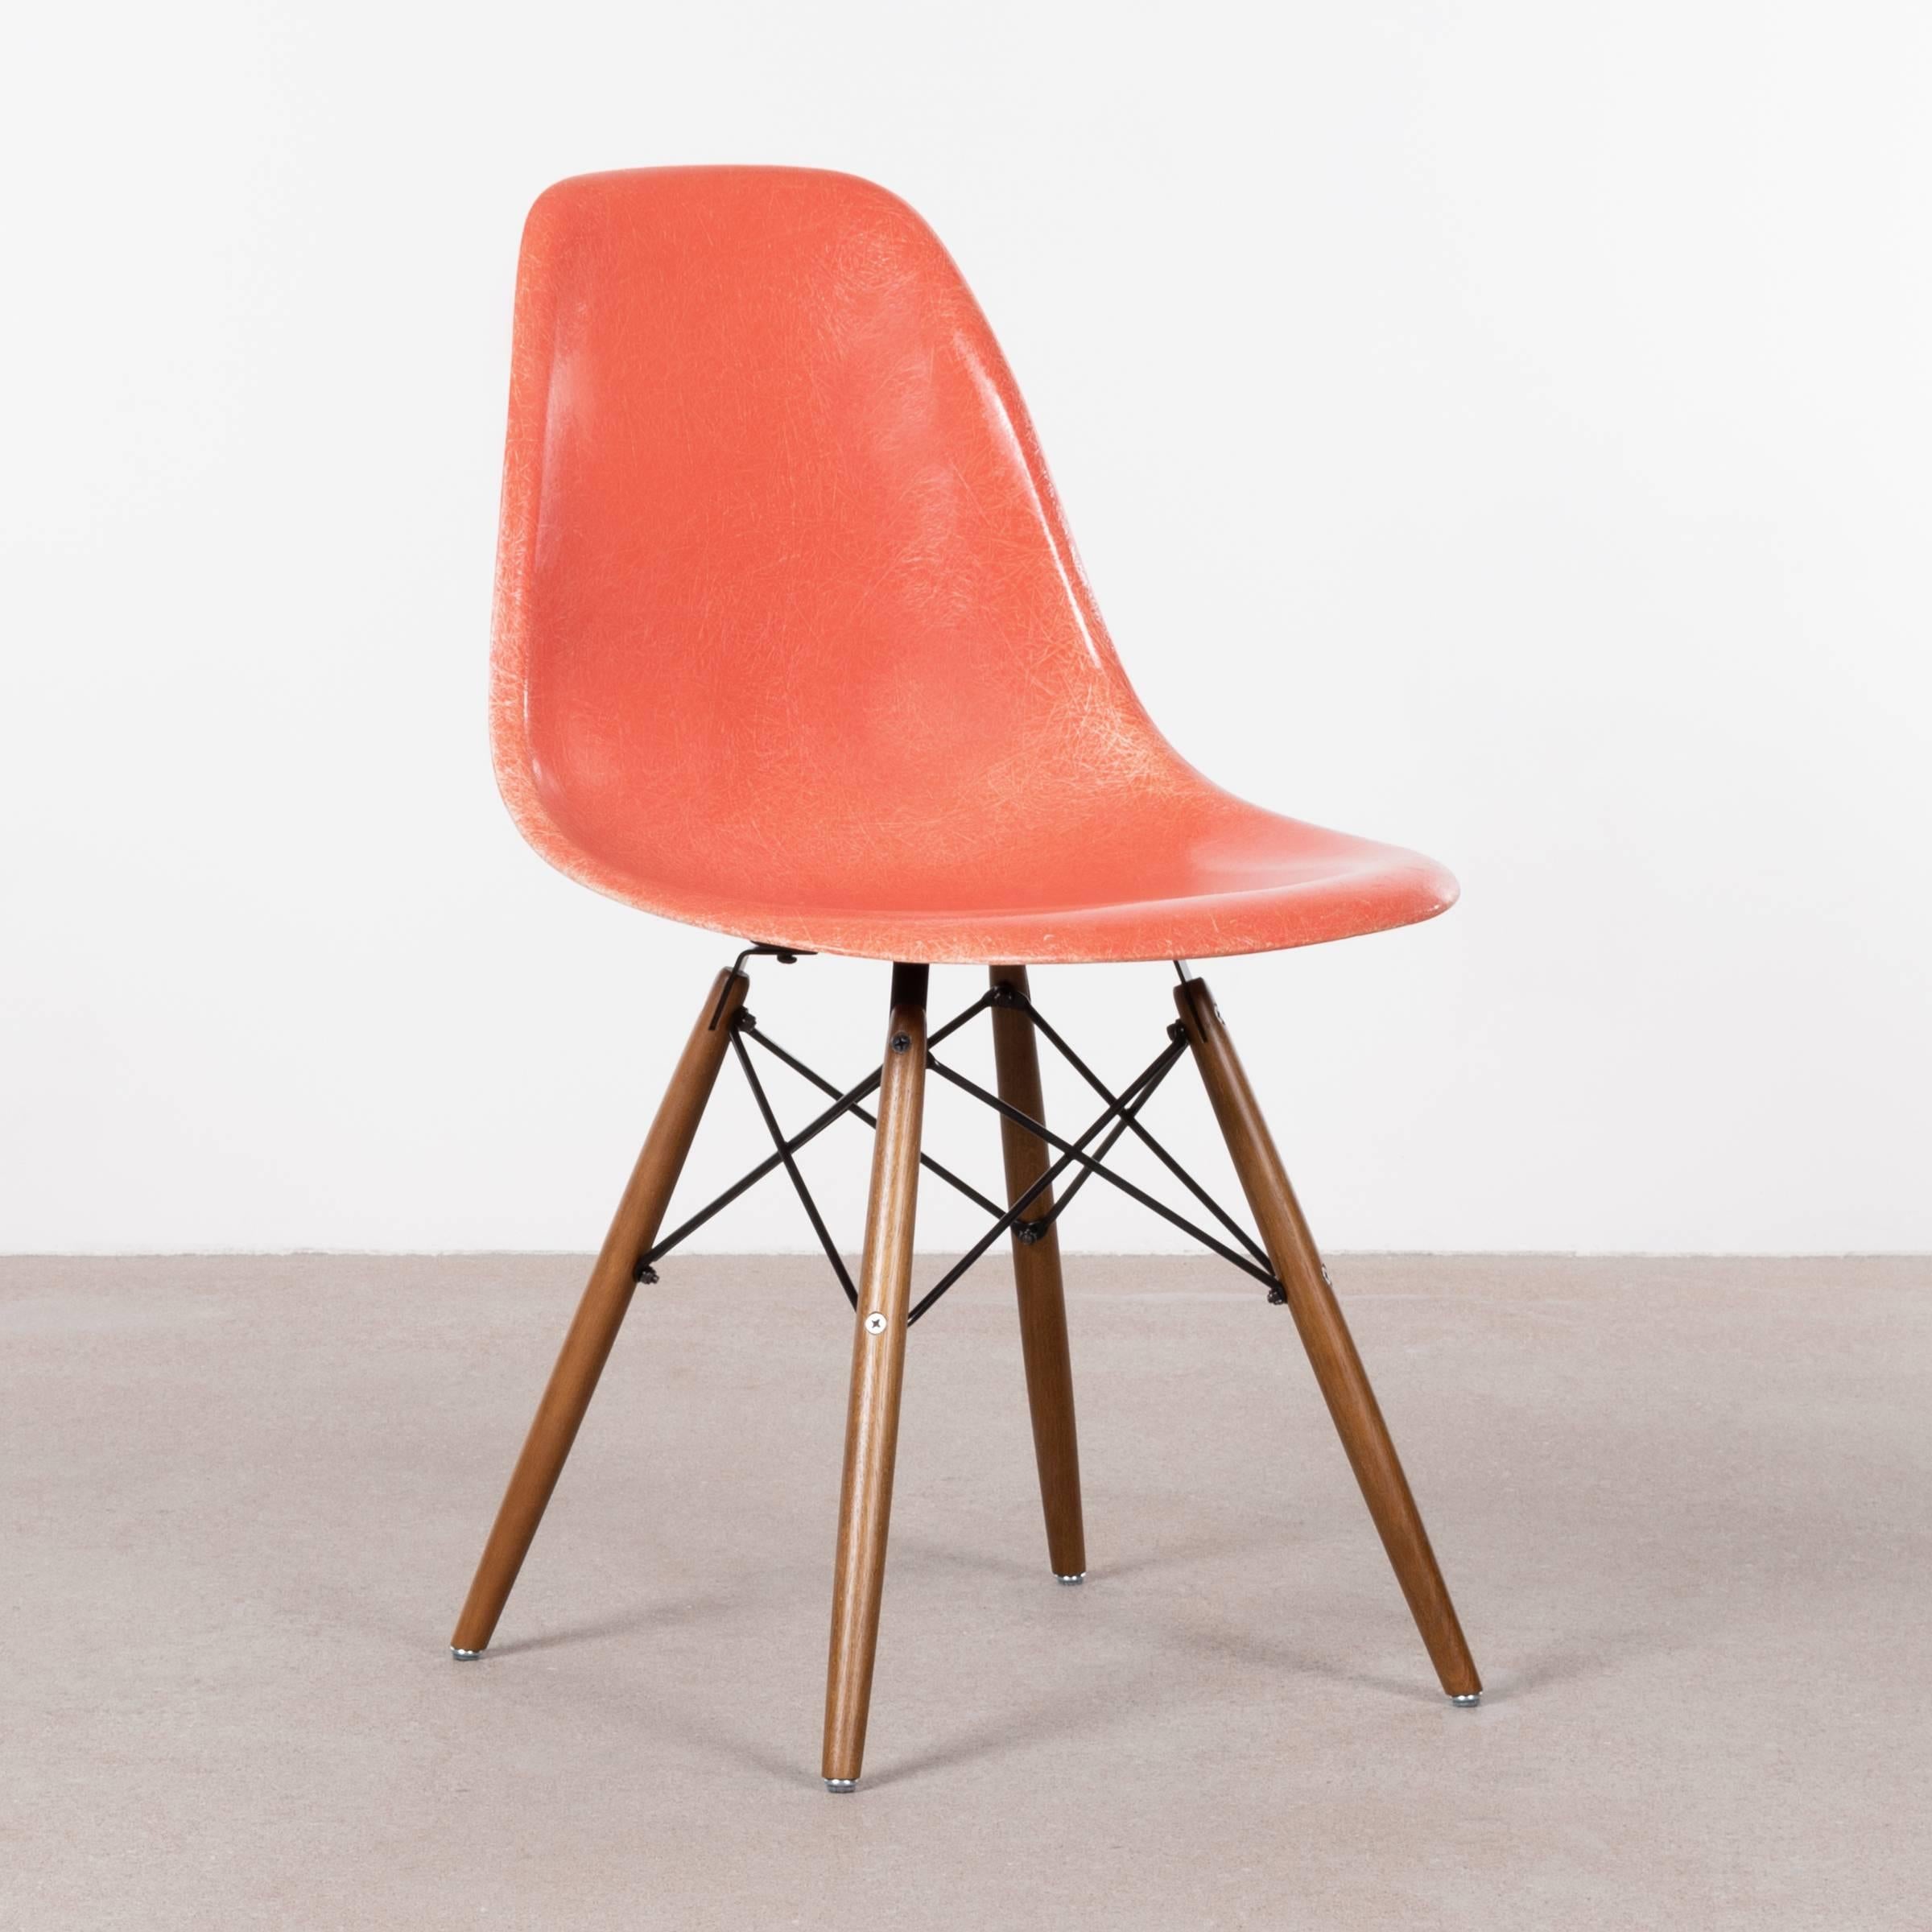 Beautiful iconic DSW chair in the color: Salmon. Shell side chair is in very good or excellent condition with only slight traces of use. Replaced shock mounts which guarantee save usability for the next decades. New dowel base. Each chair is signed